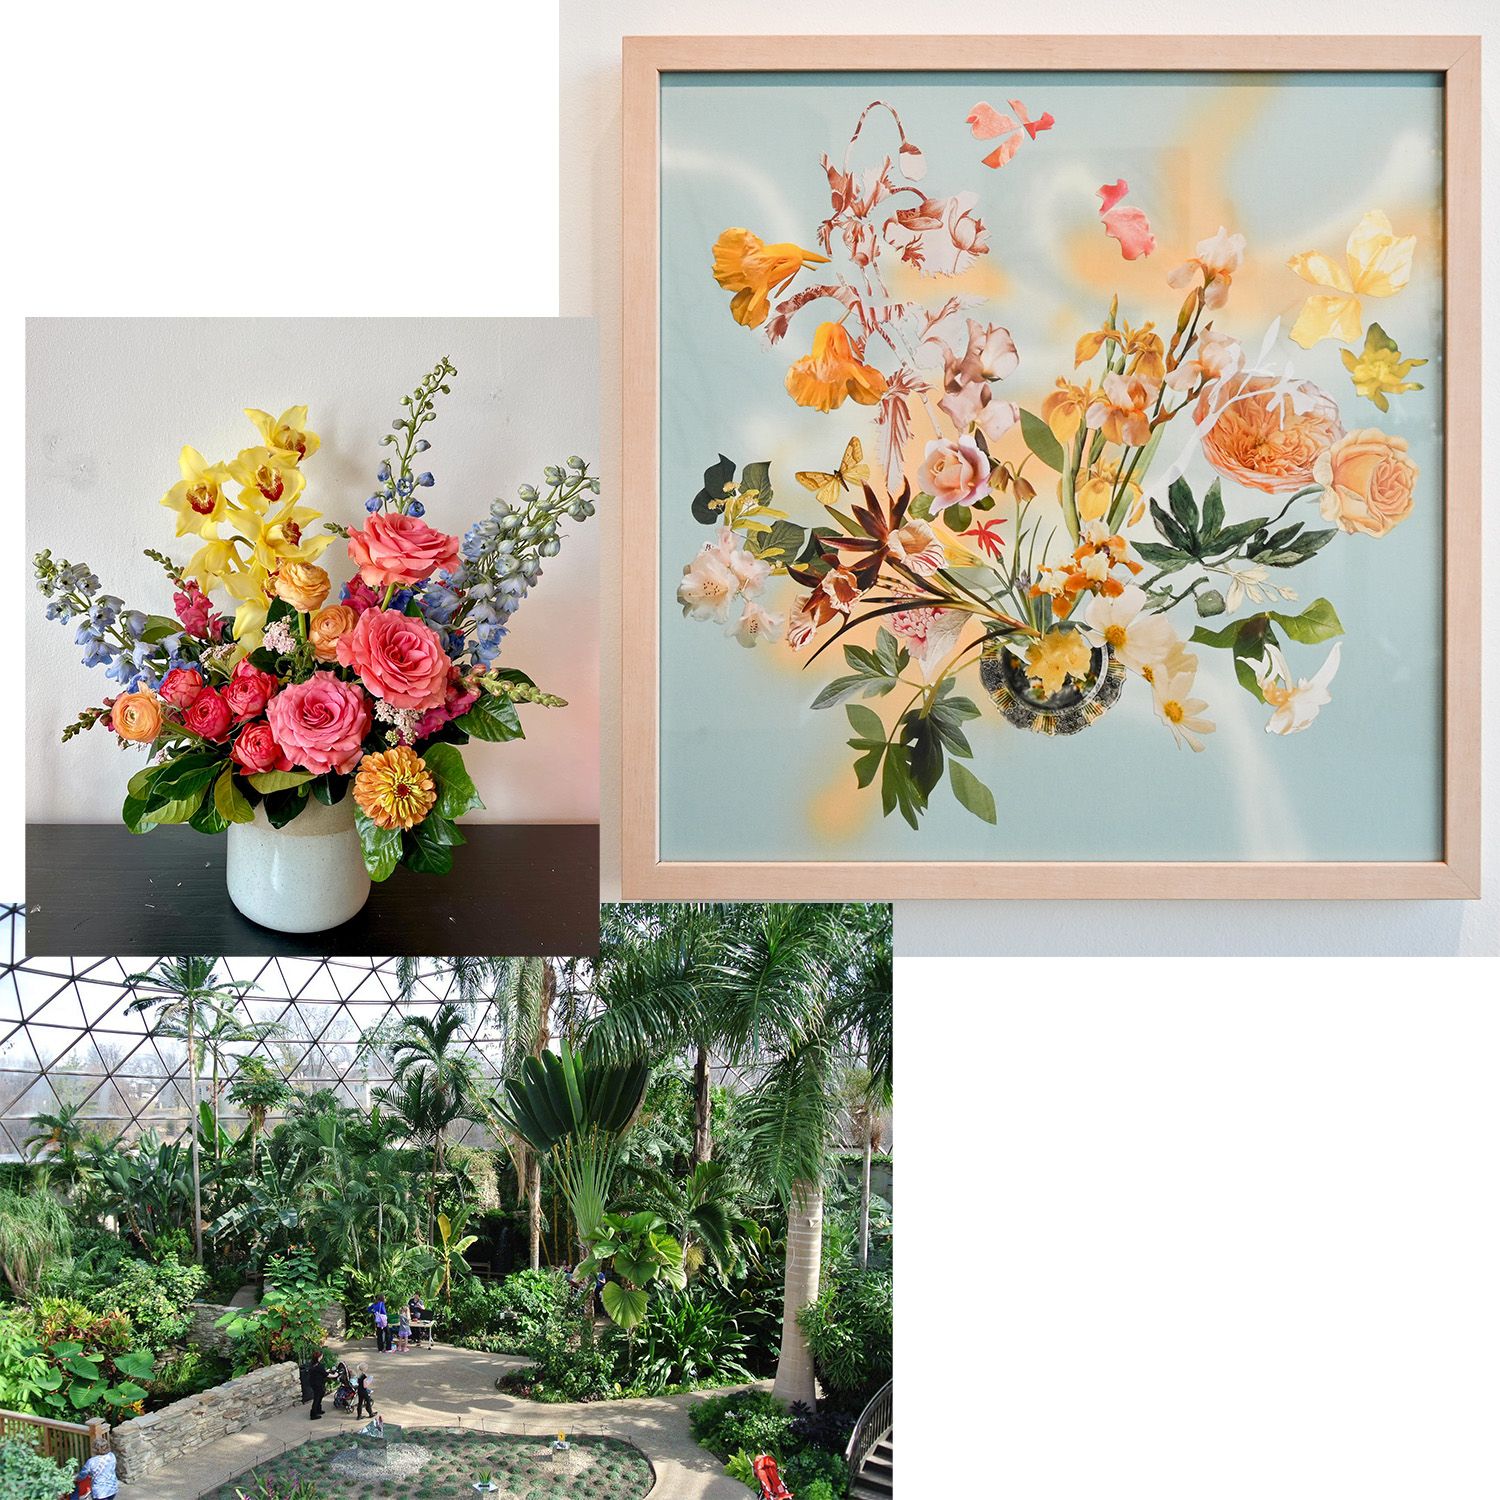 Marcy Vreeland's Aqua 2, Wildflower's Lush Garden and The Greater Des Moines Botanical Garden